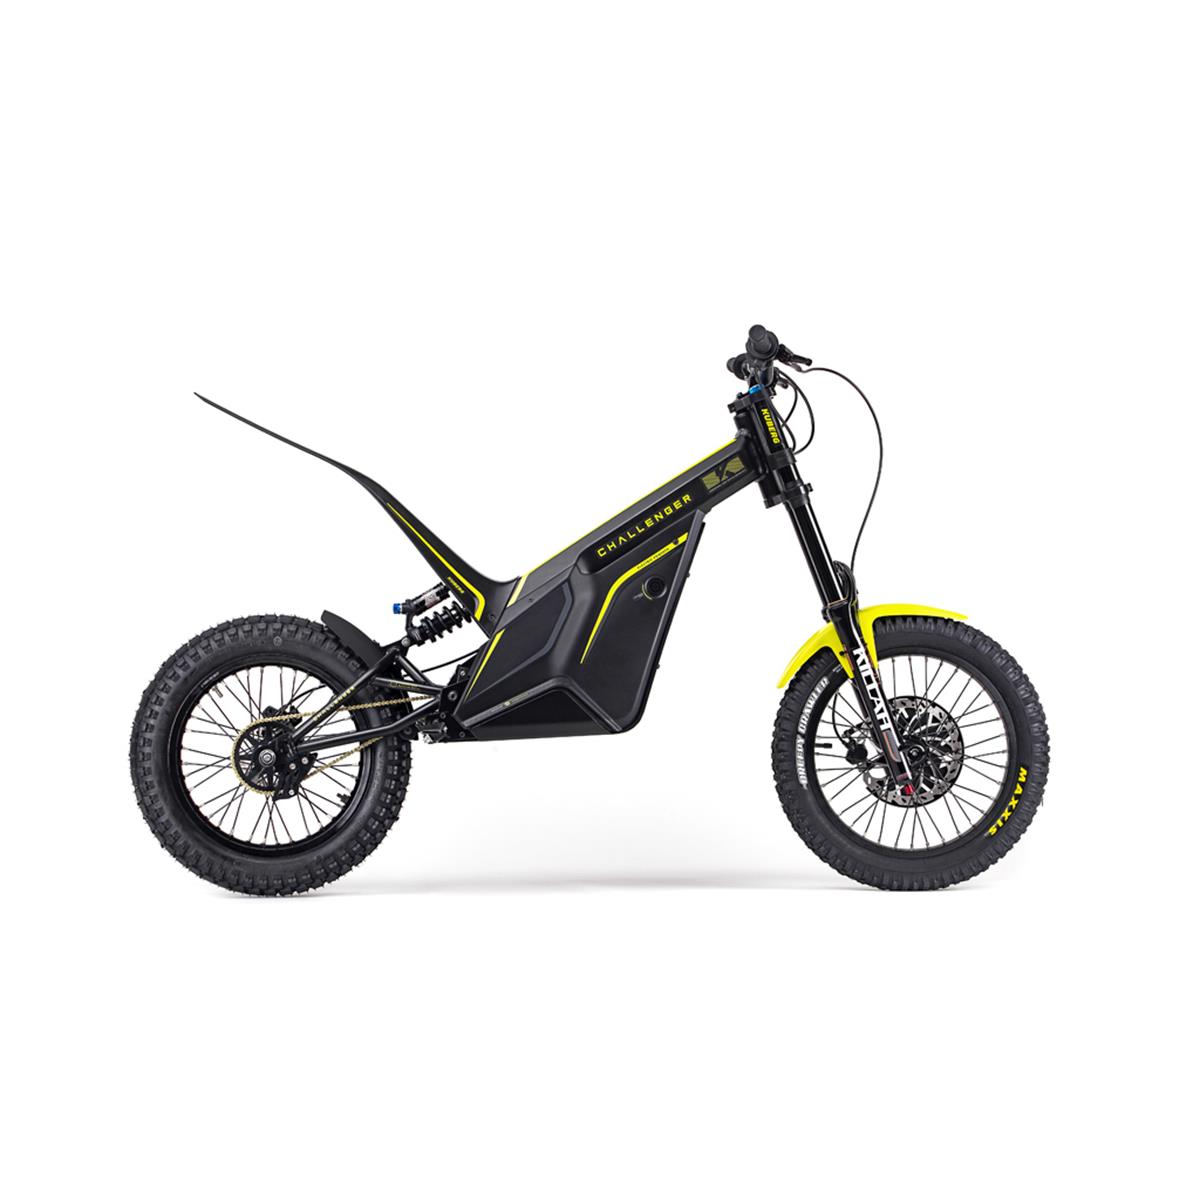 Kuberg Electric Motorcycle Challenger 20 Inches, 8 kW, 12+ Years